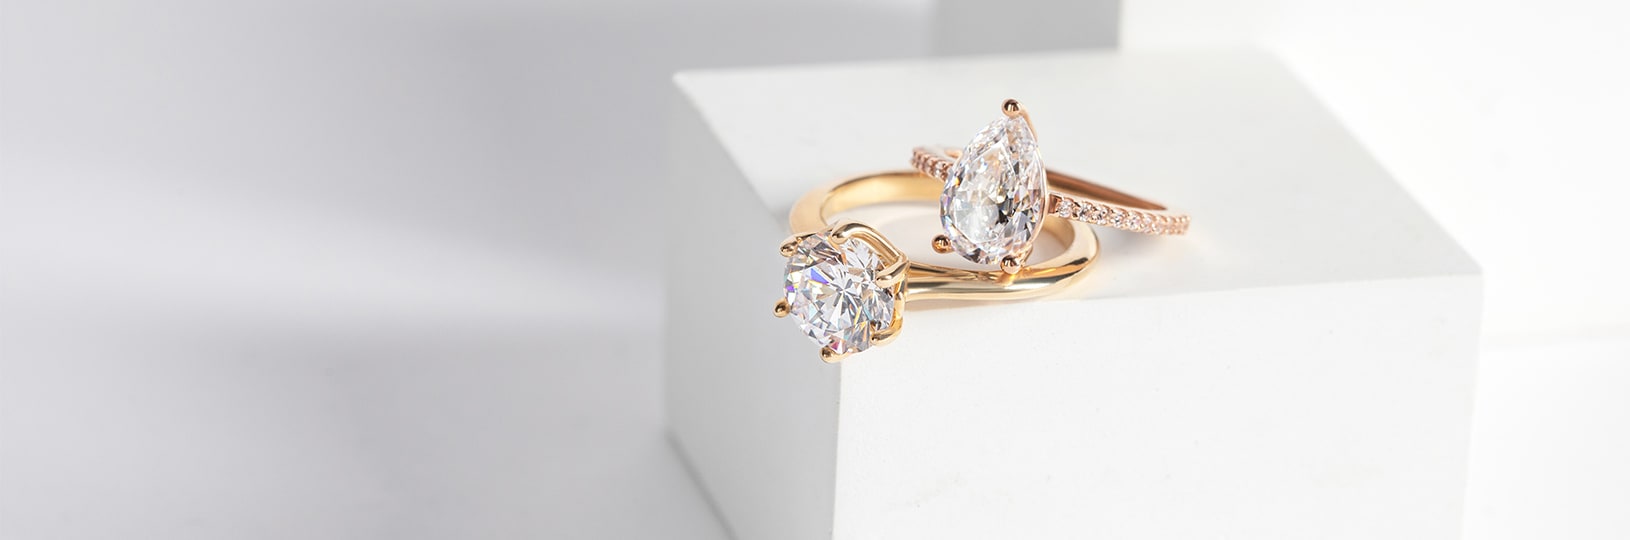 Moissanite vs Diamond: What’s the Difference?